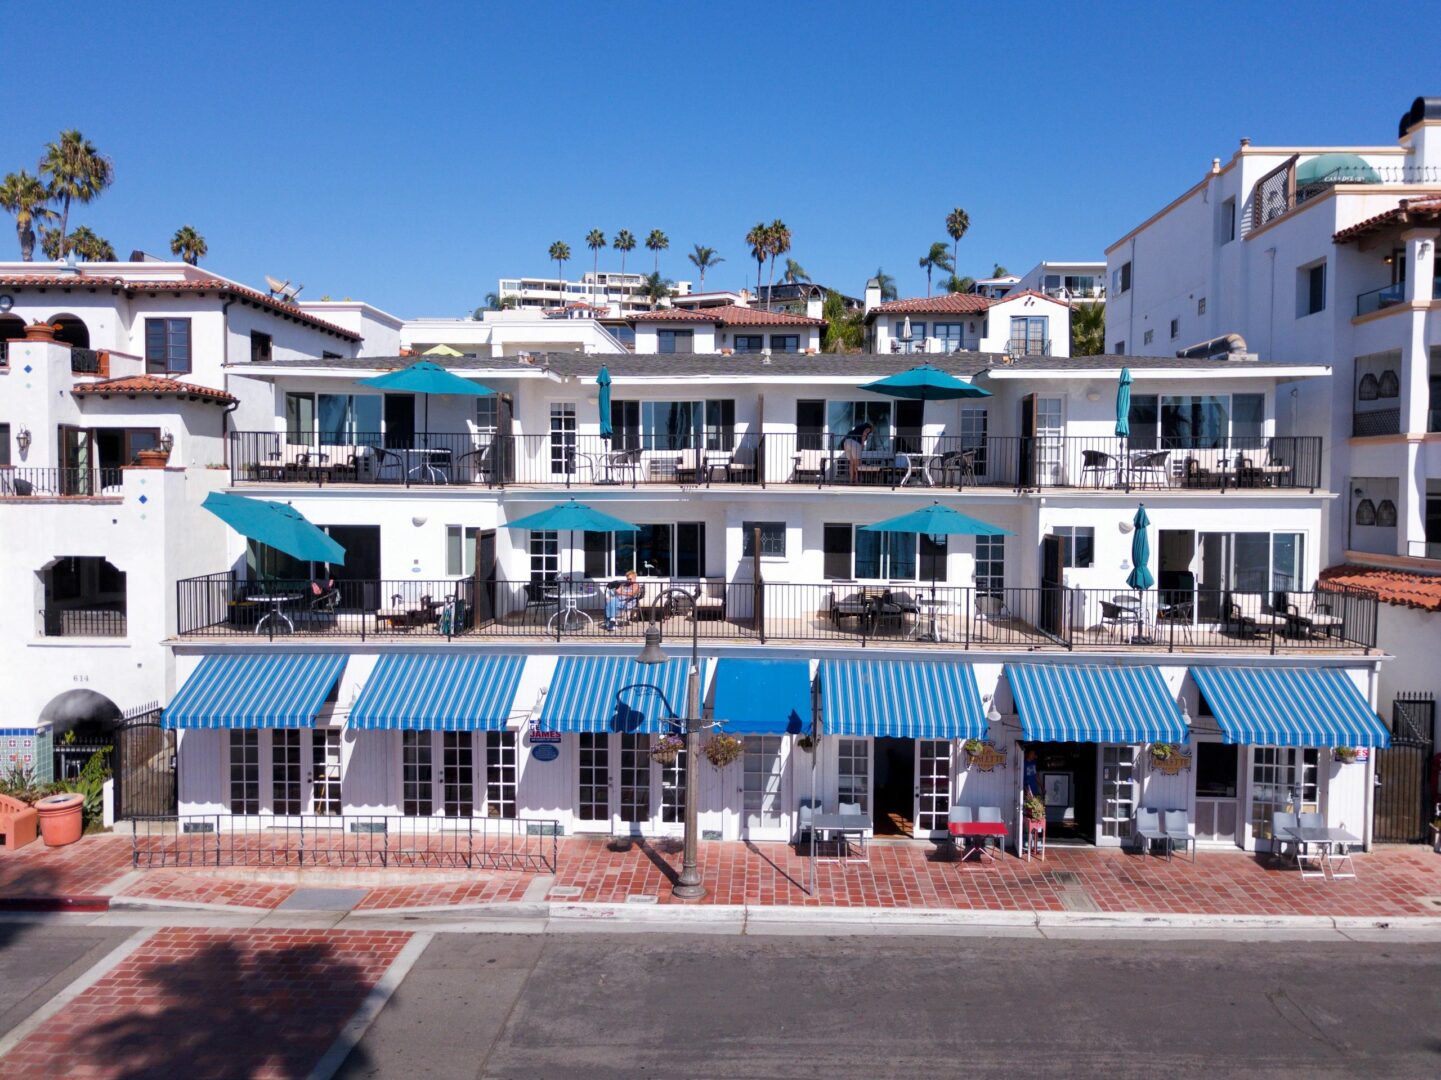 A row of blue and white buildings with awnings.